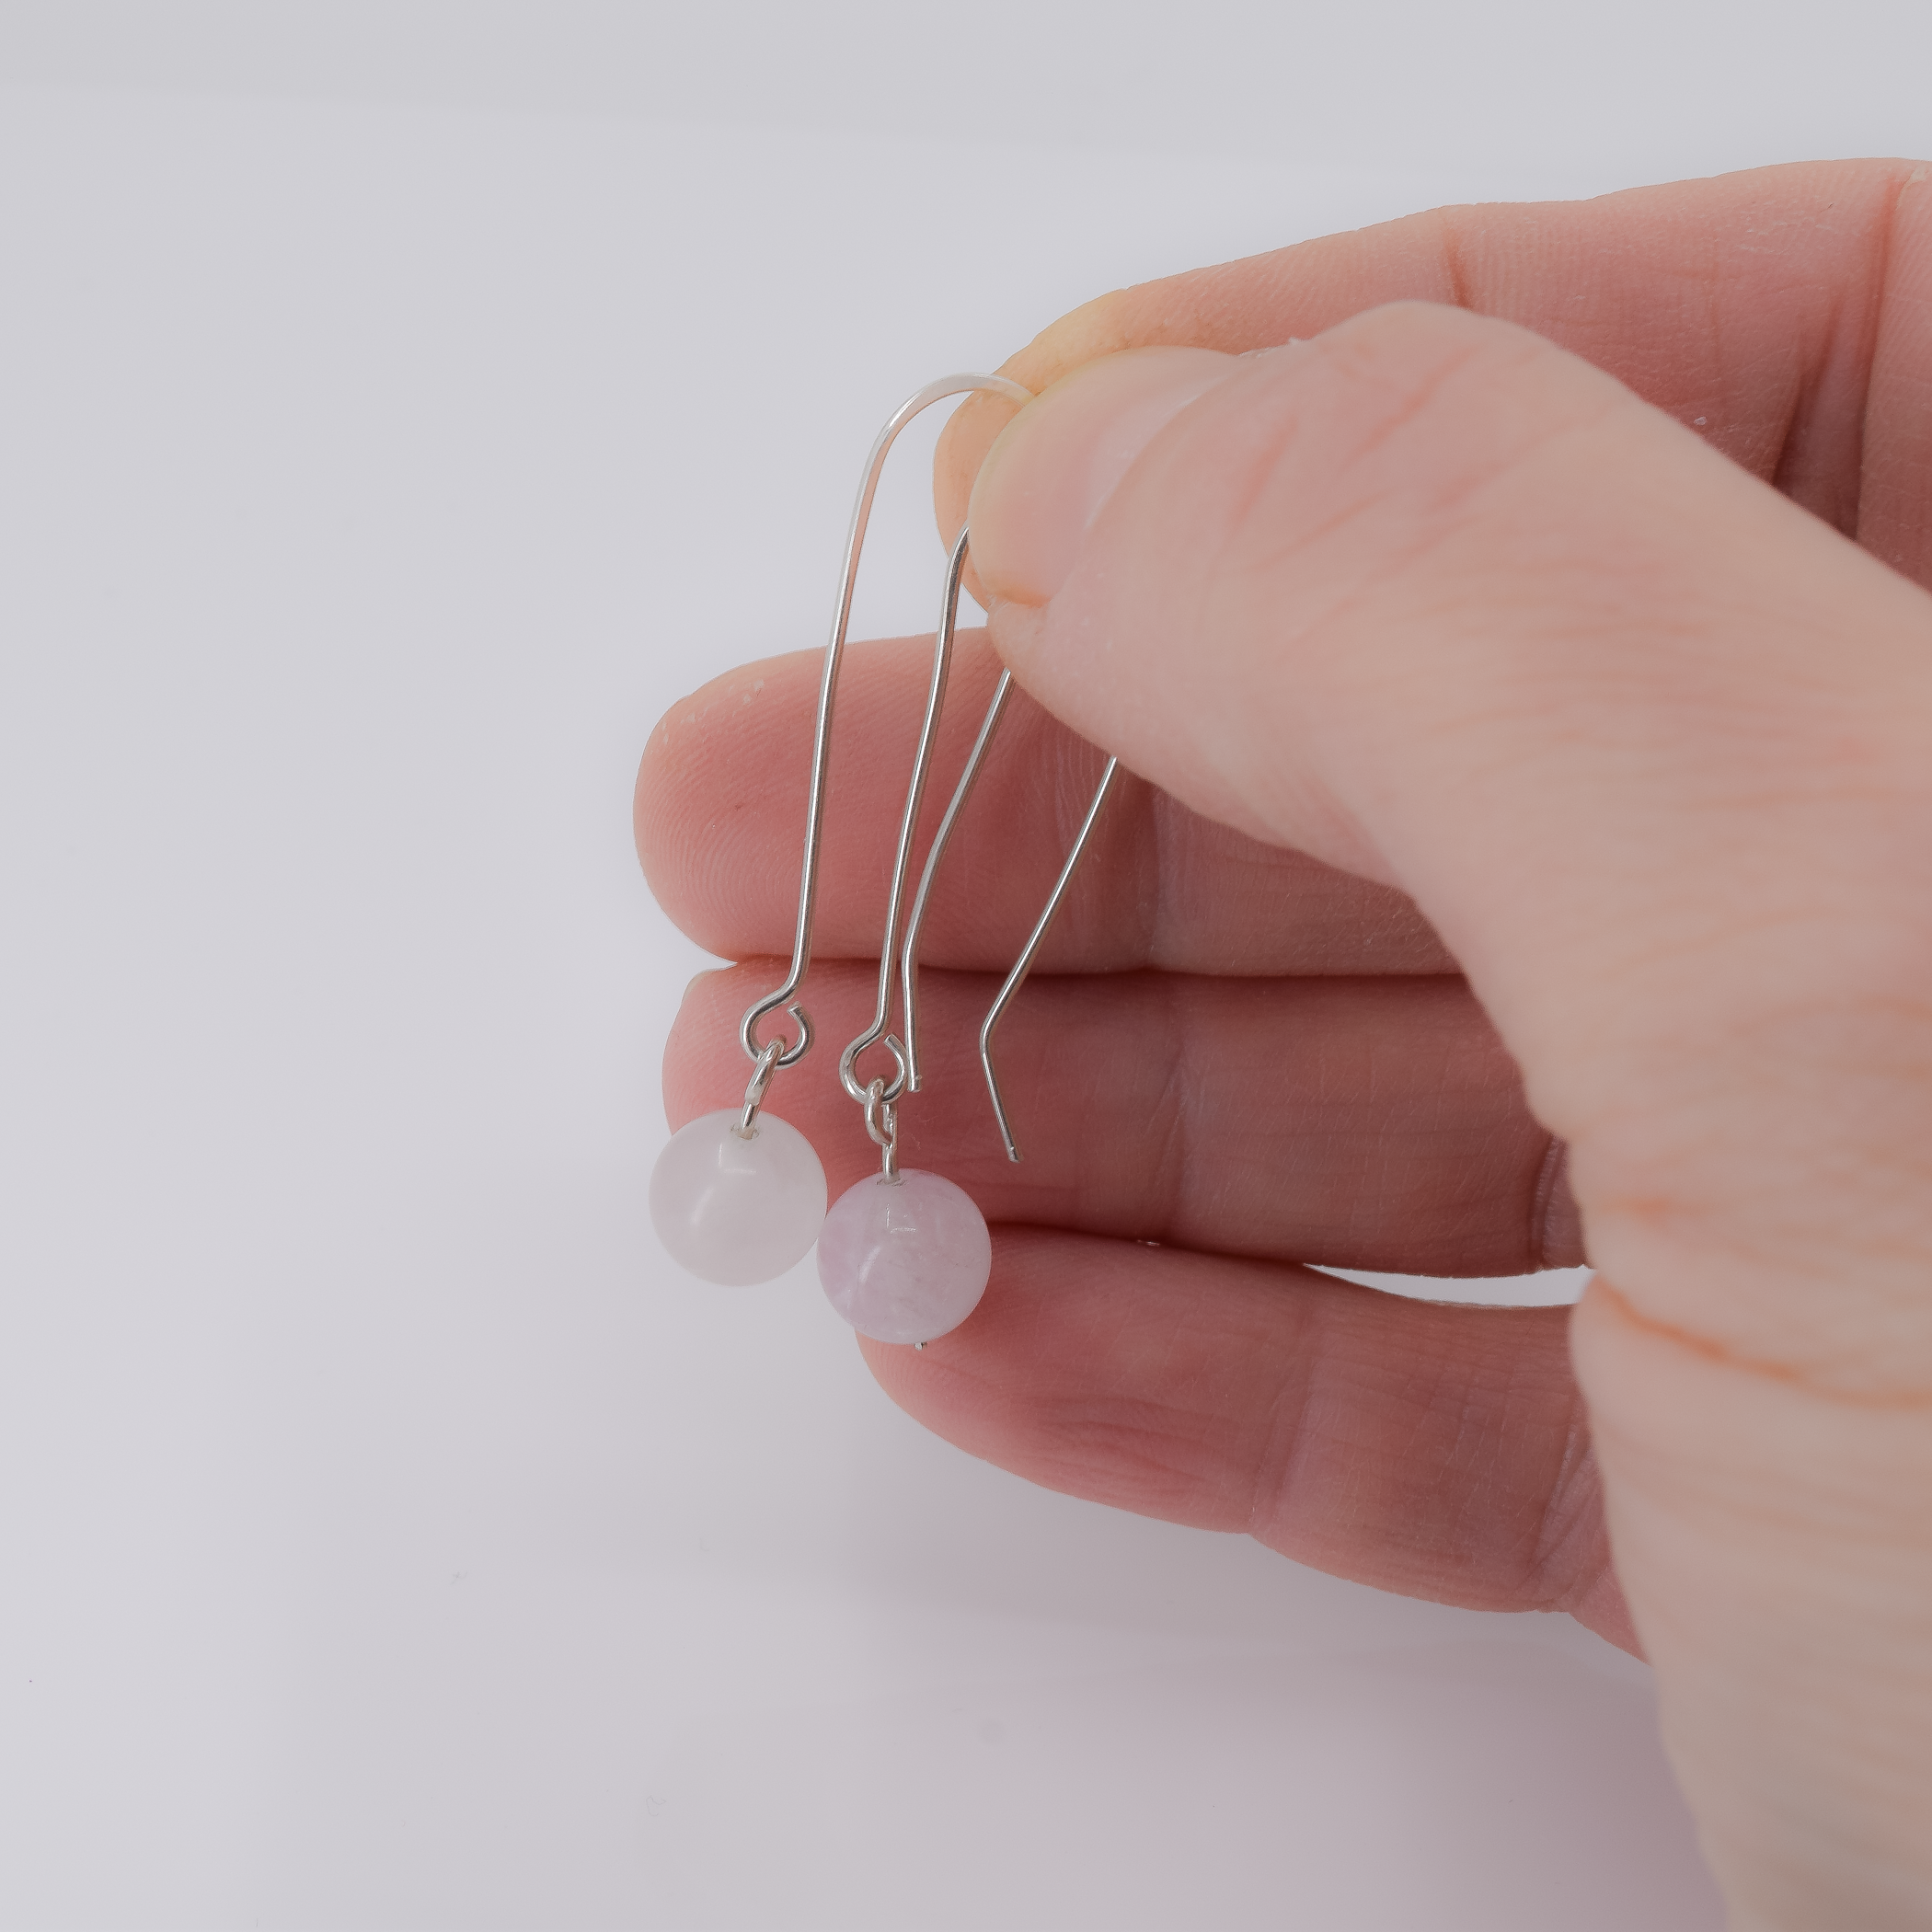 Long dangle sterling silver earrings with an 8mm round morganite bead in a light pink color shown in hand for scale